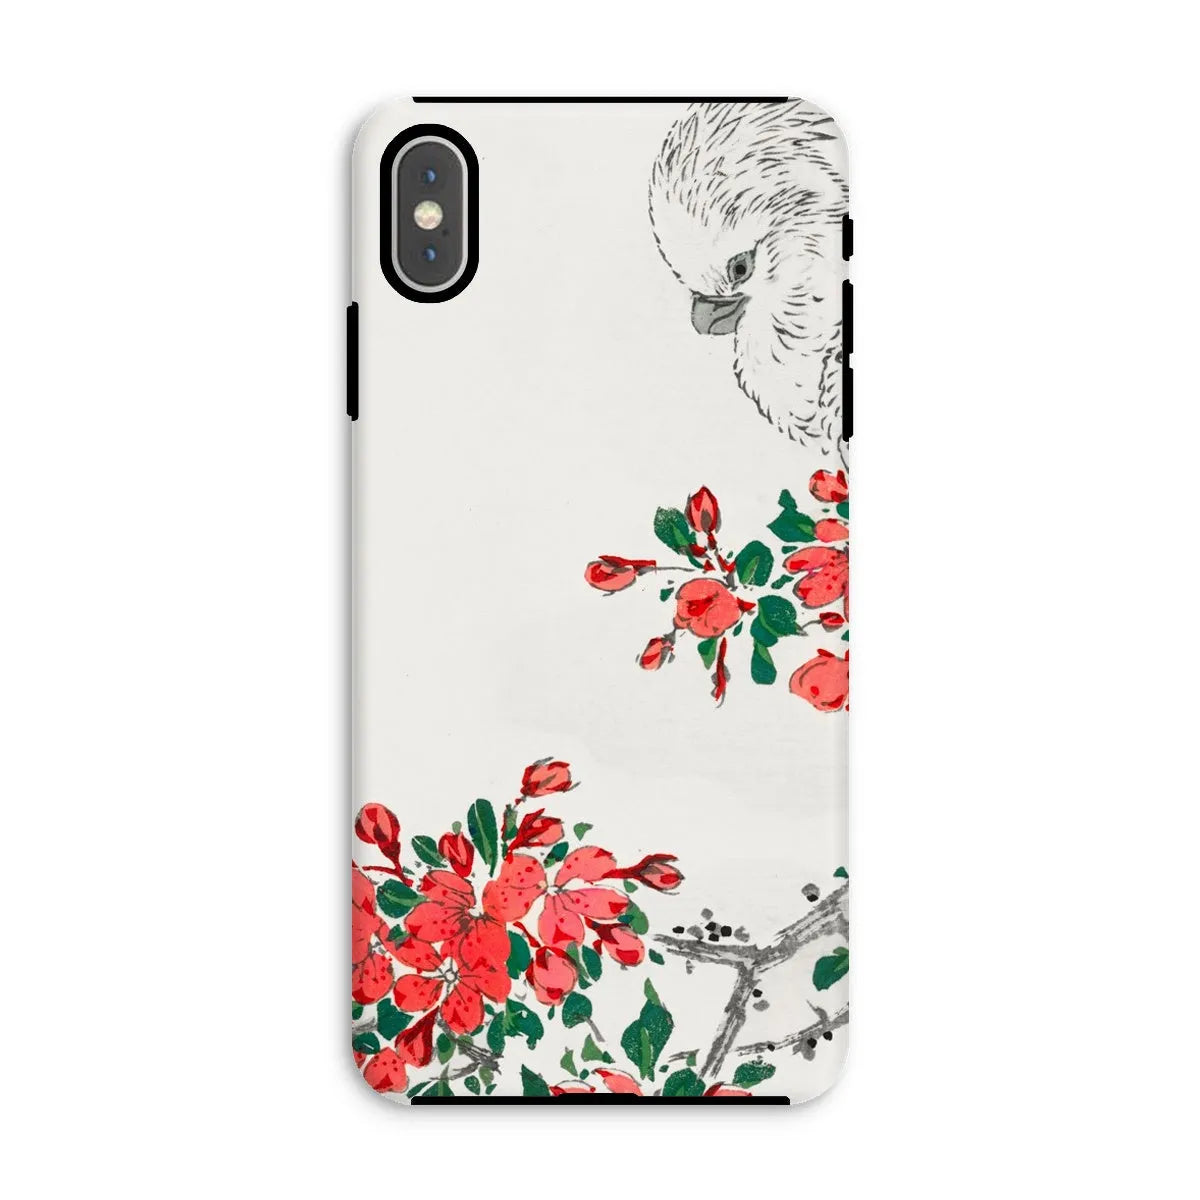 Parrot And Pyrus - Japanese Bird Phone Case - Numata Kashu - Iphone Xs Max / Matte - Mobile Phone Cases - Aesthetic Art